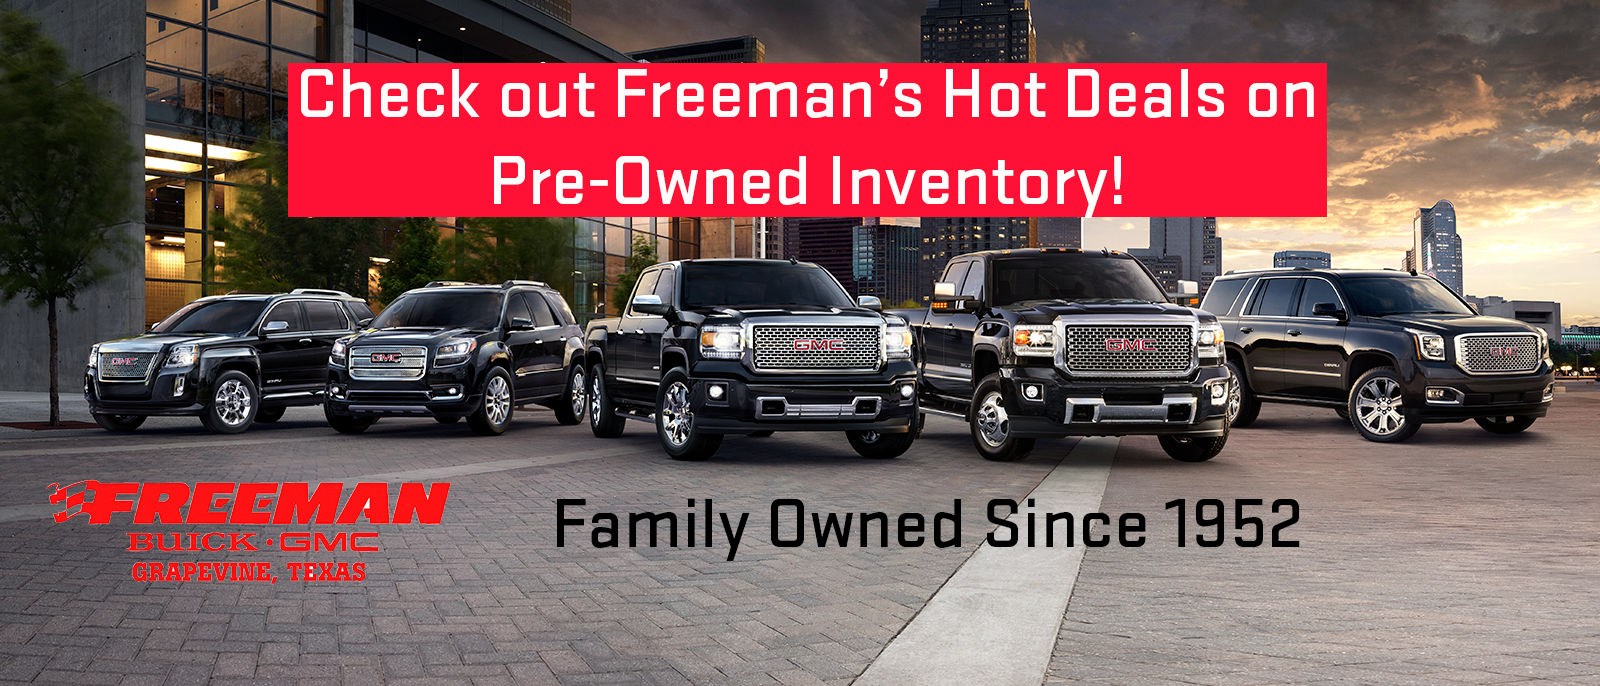 Come See Freeman's Hot Deals on Pre-Owned Inventory!